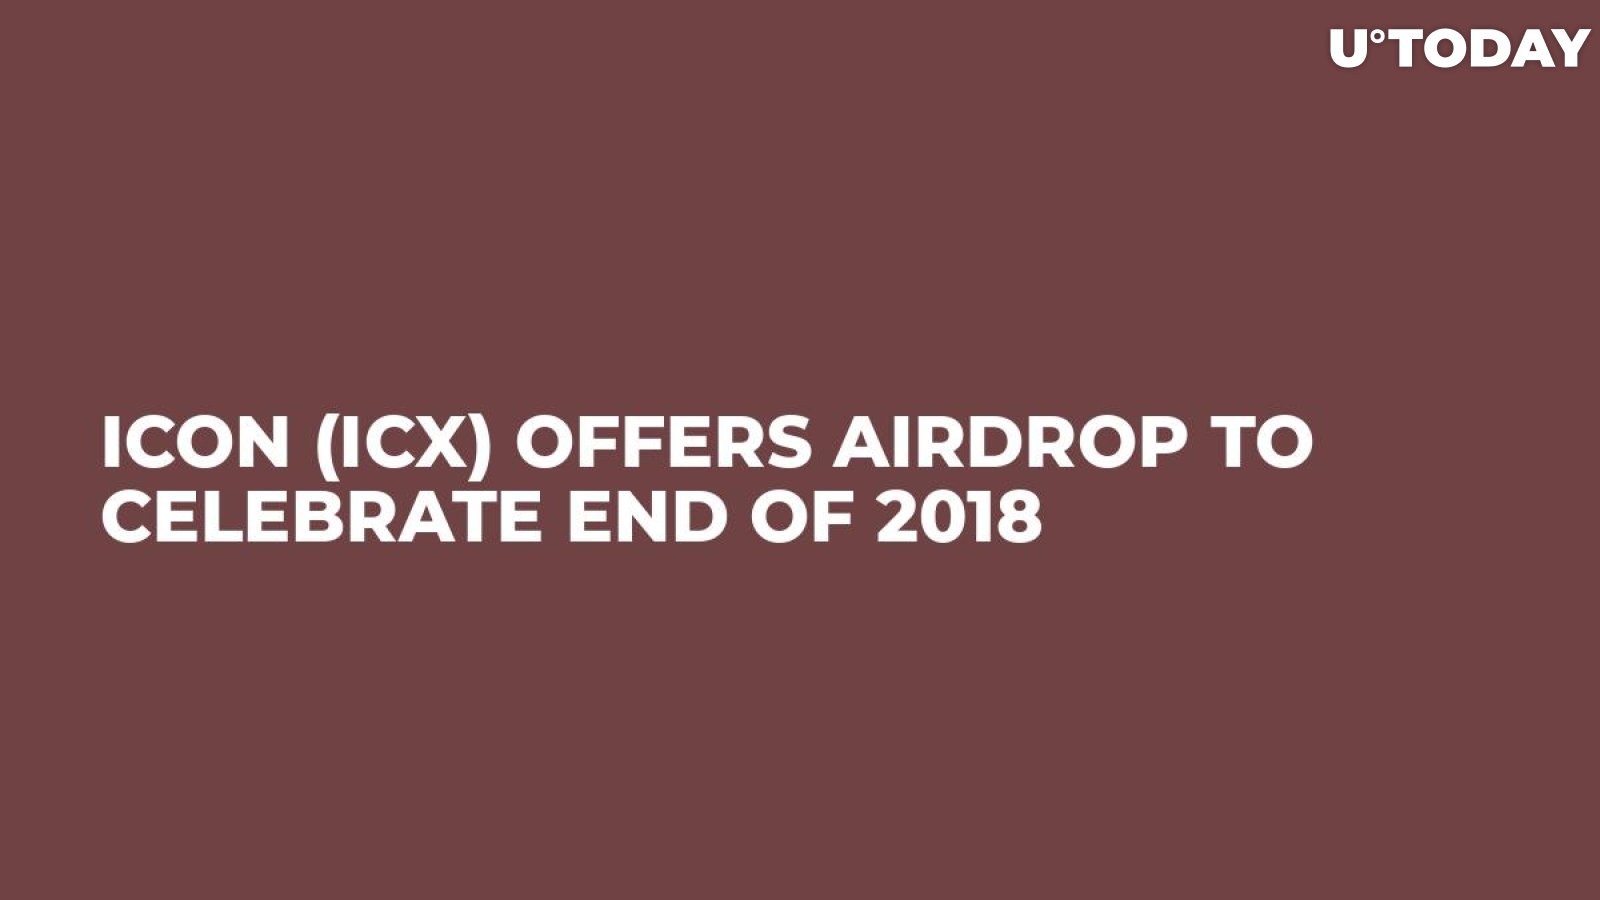 ICON (ICX) Offers Airdrop to Celebrate End of 2018